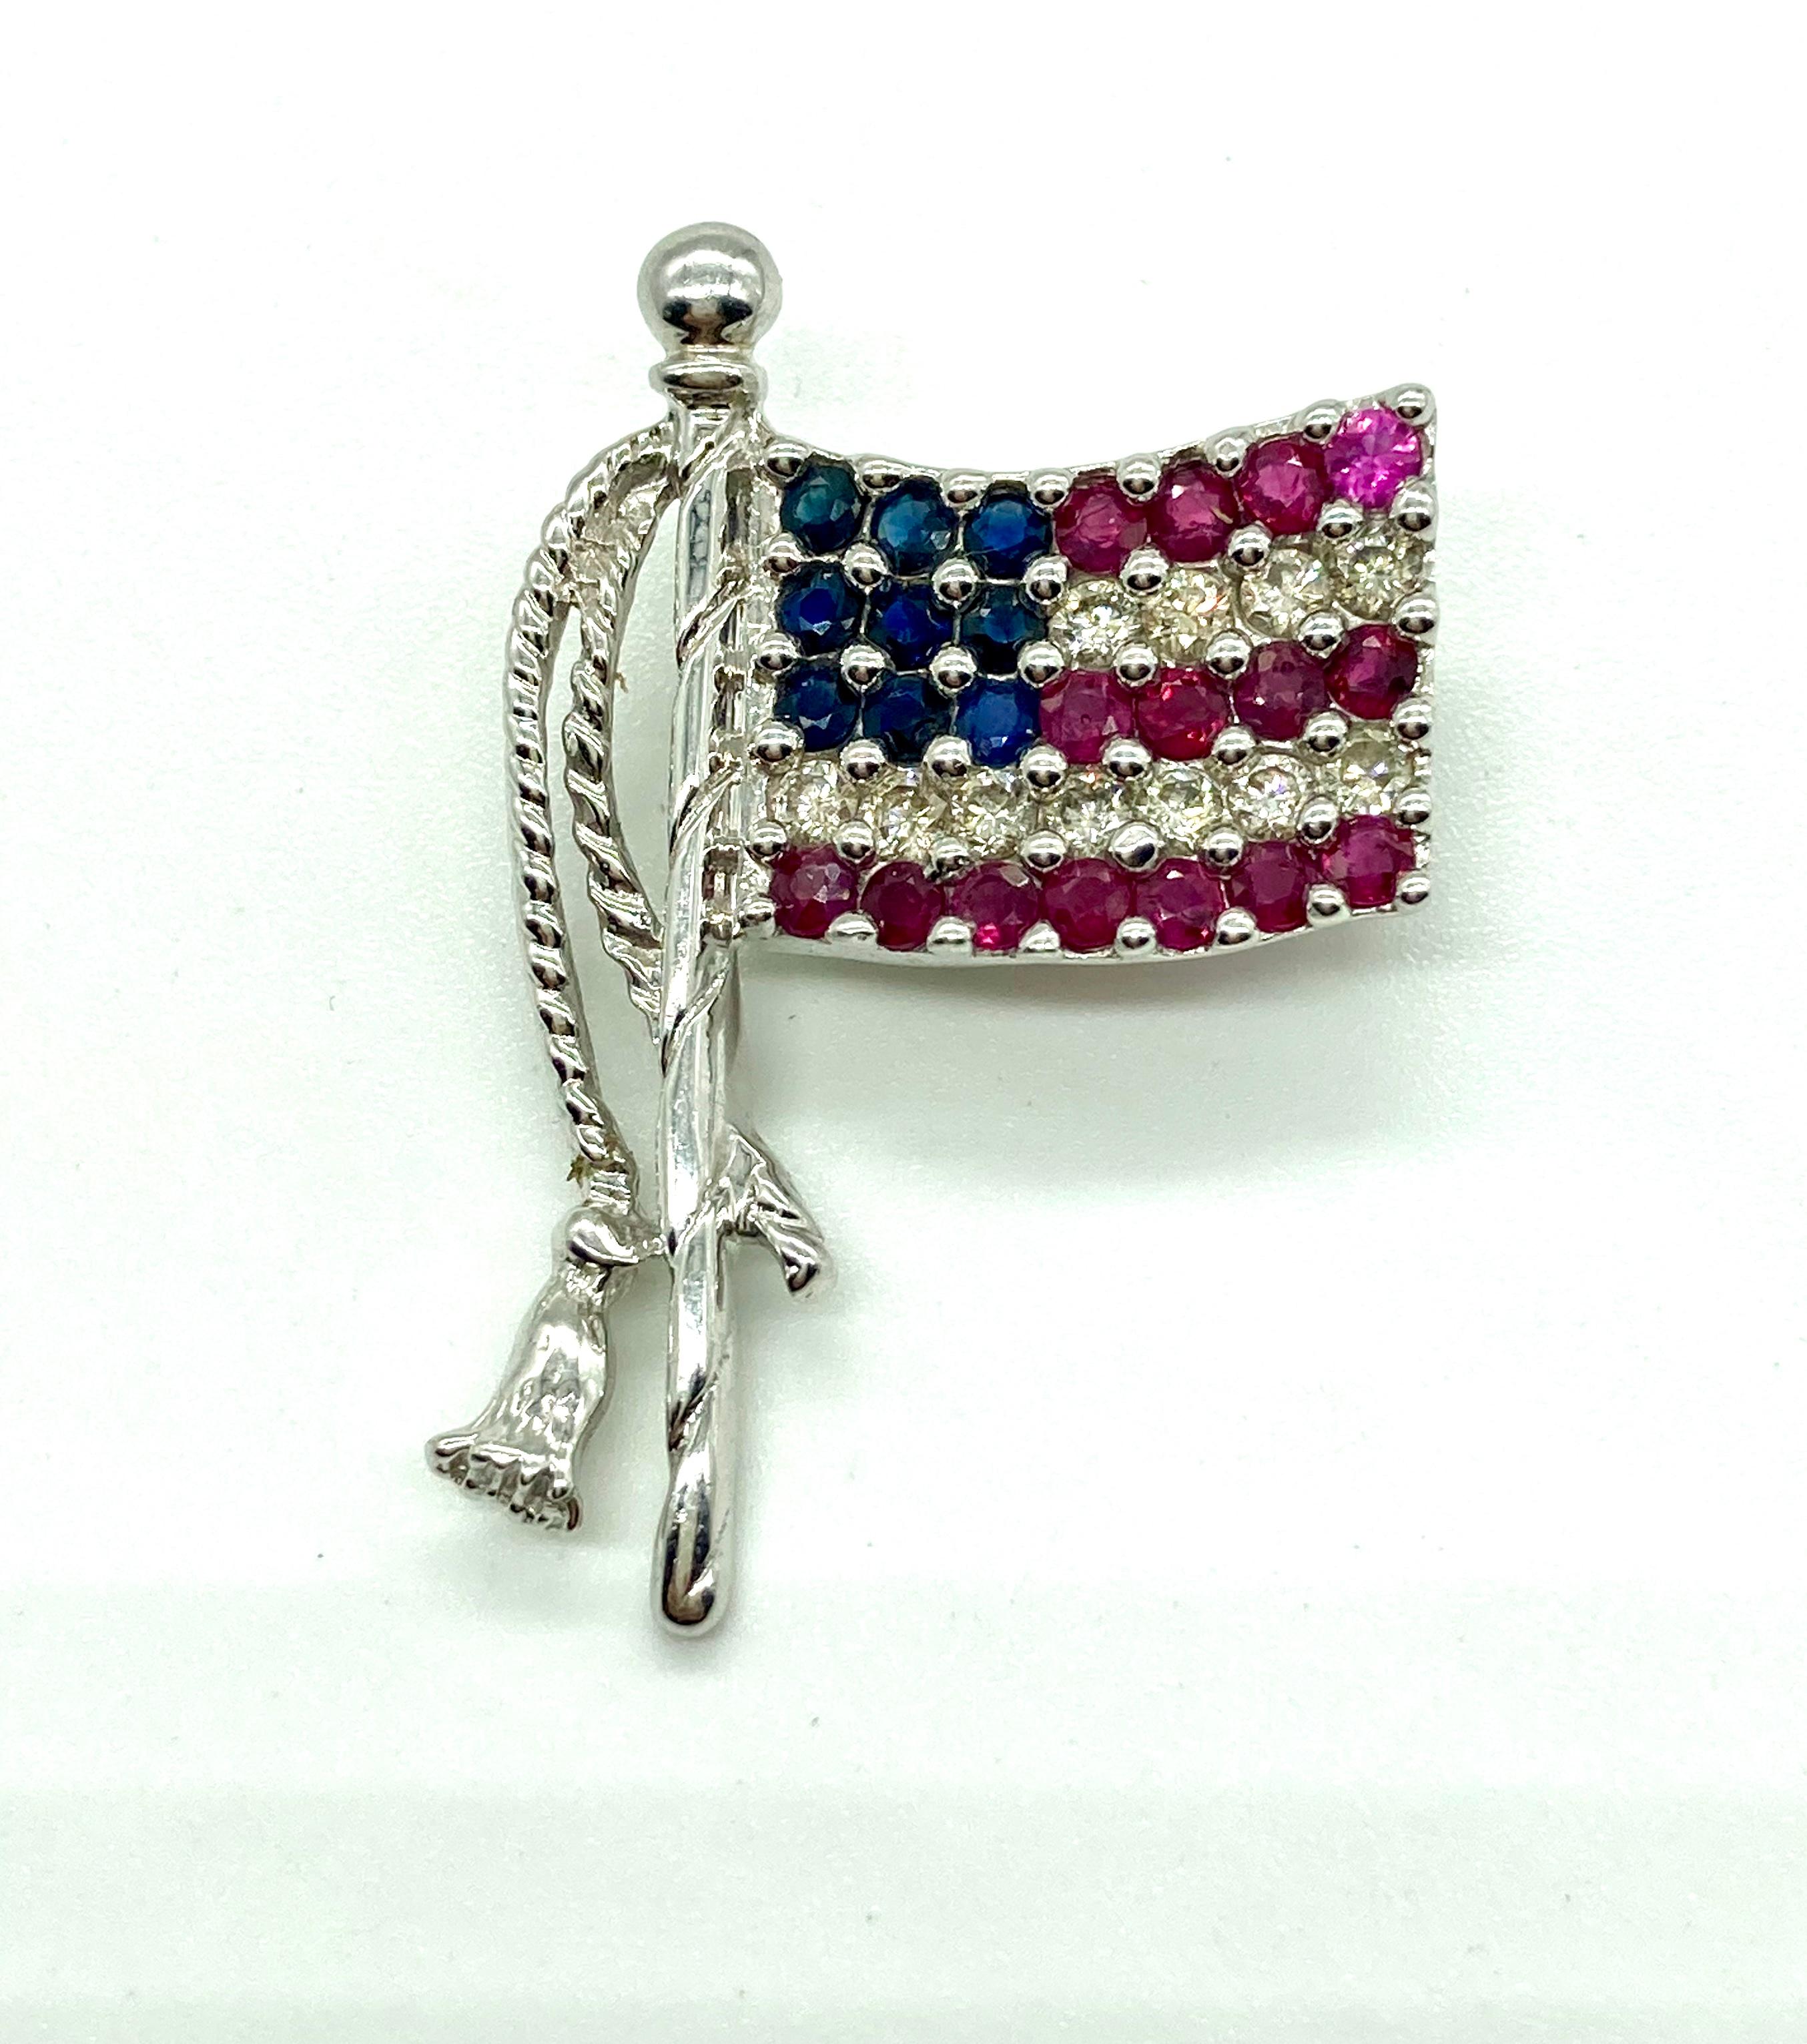 A beautiful American flag brooch embellished with rubies, sapphires, and diamonds. Late 20th century.